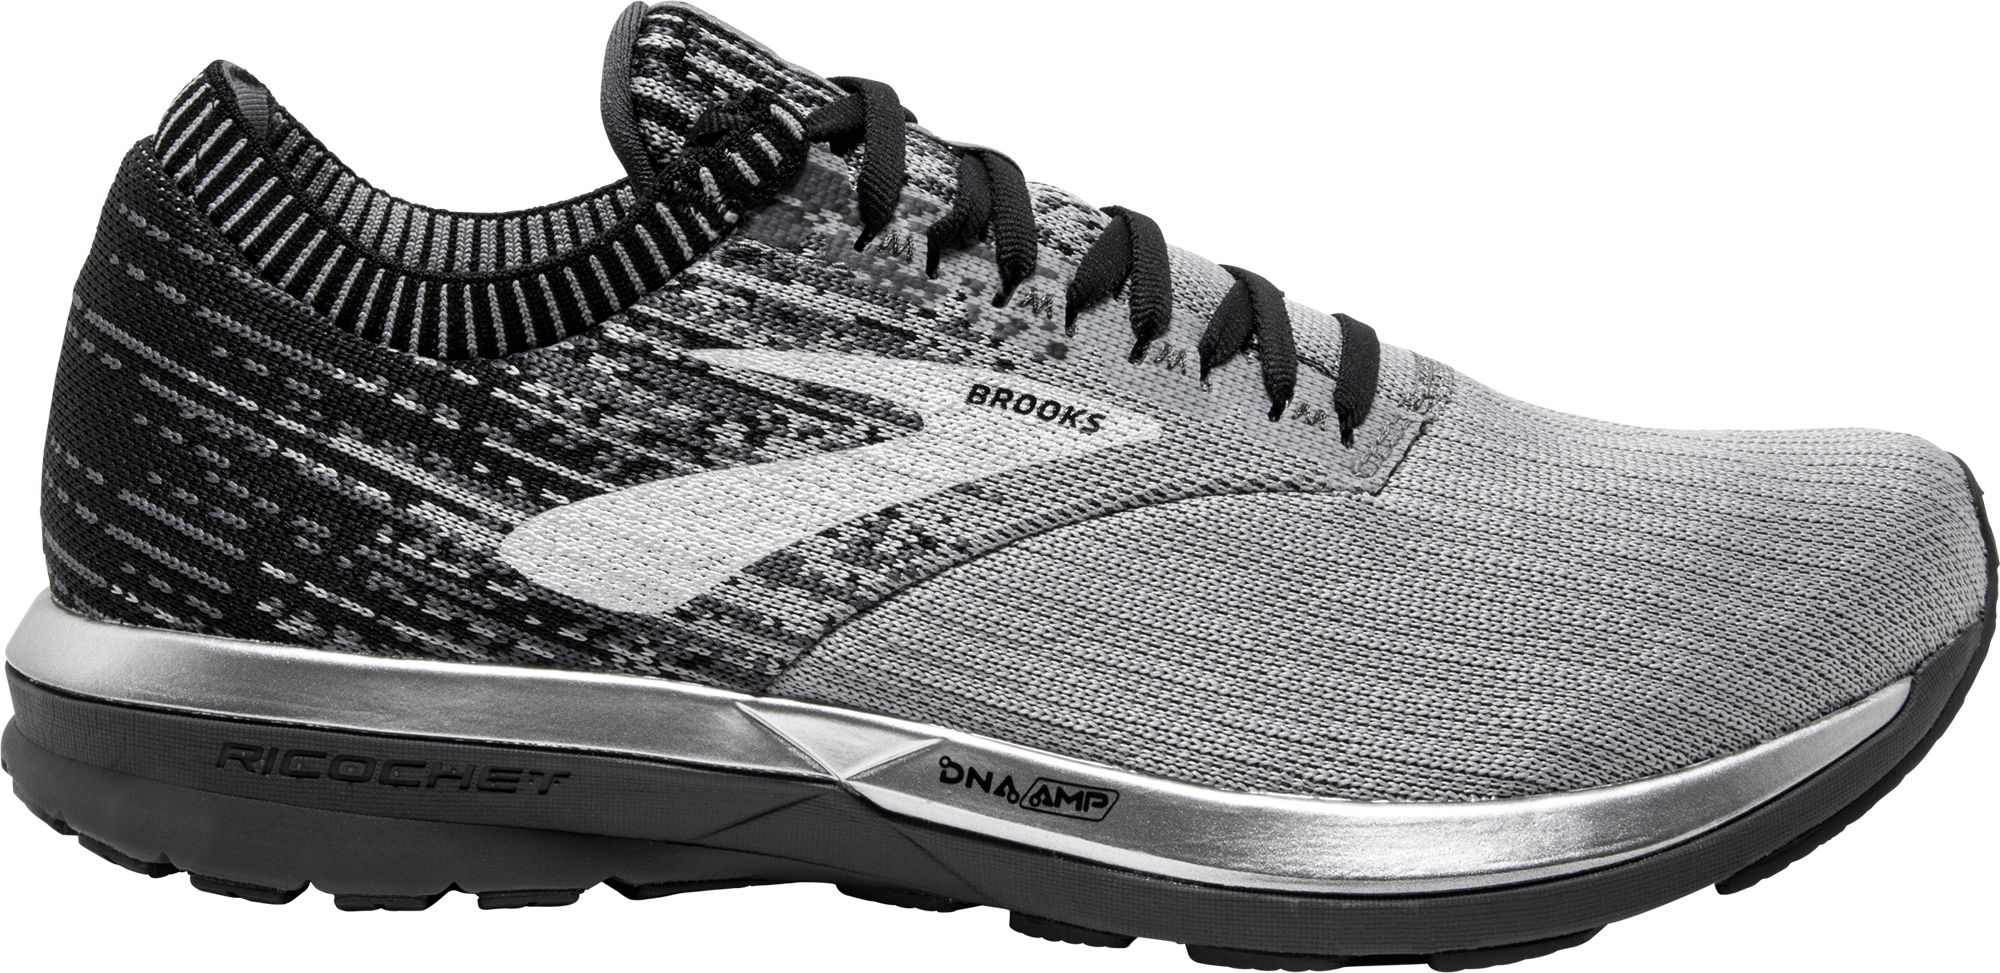 Shop Running Shoes | DICK'S Sporting Goods